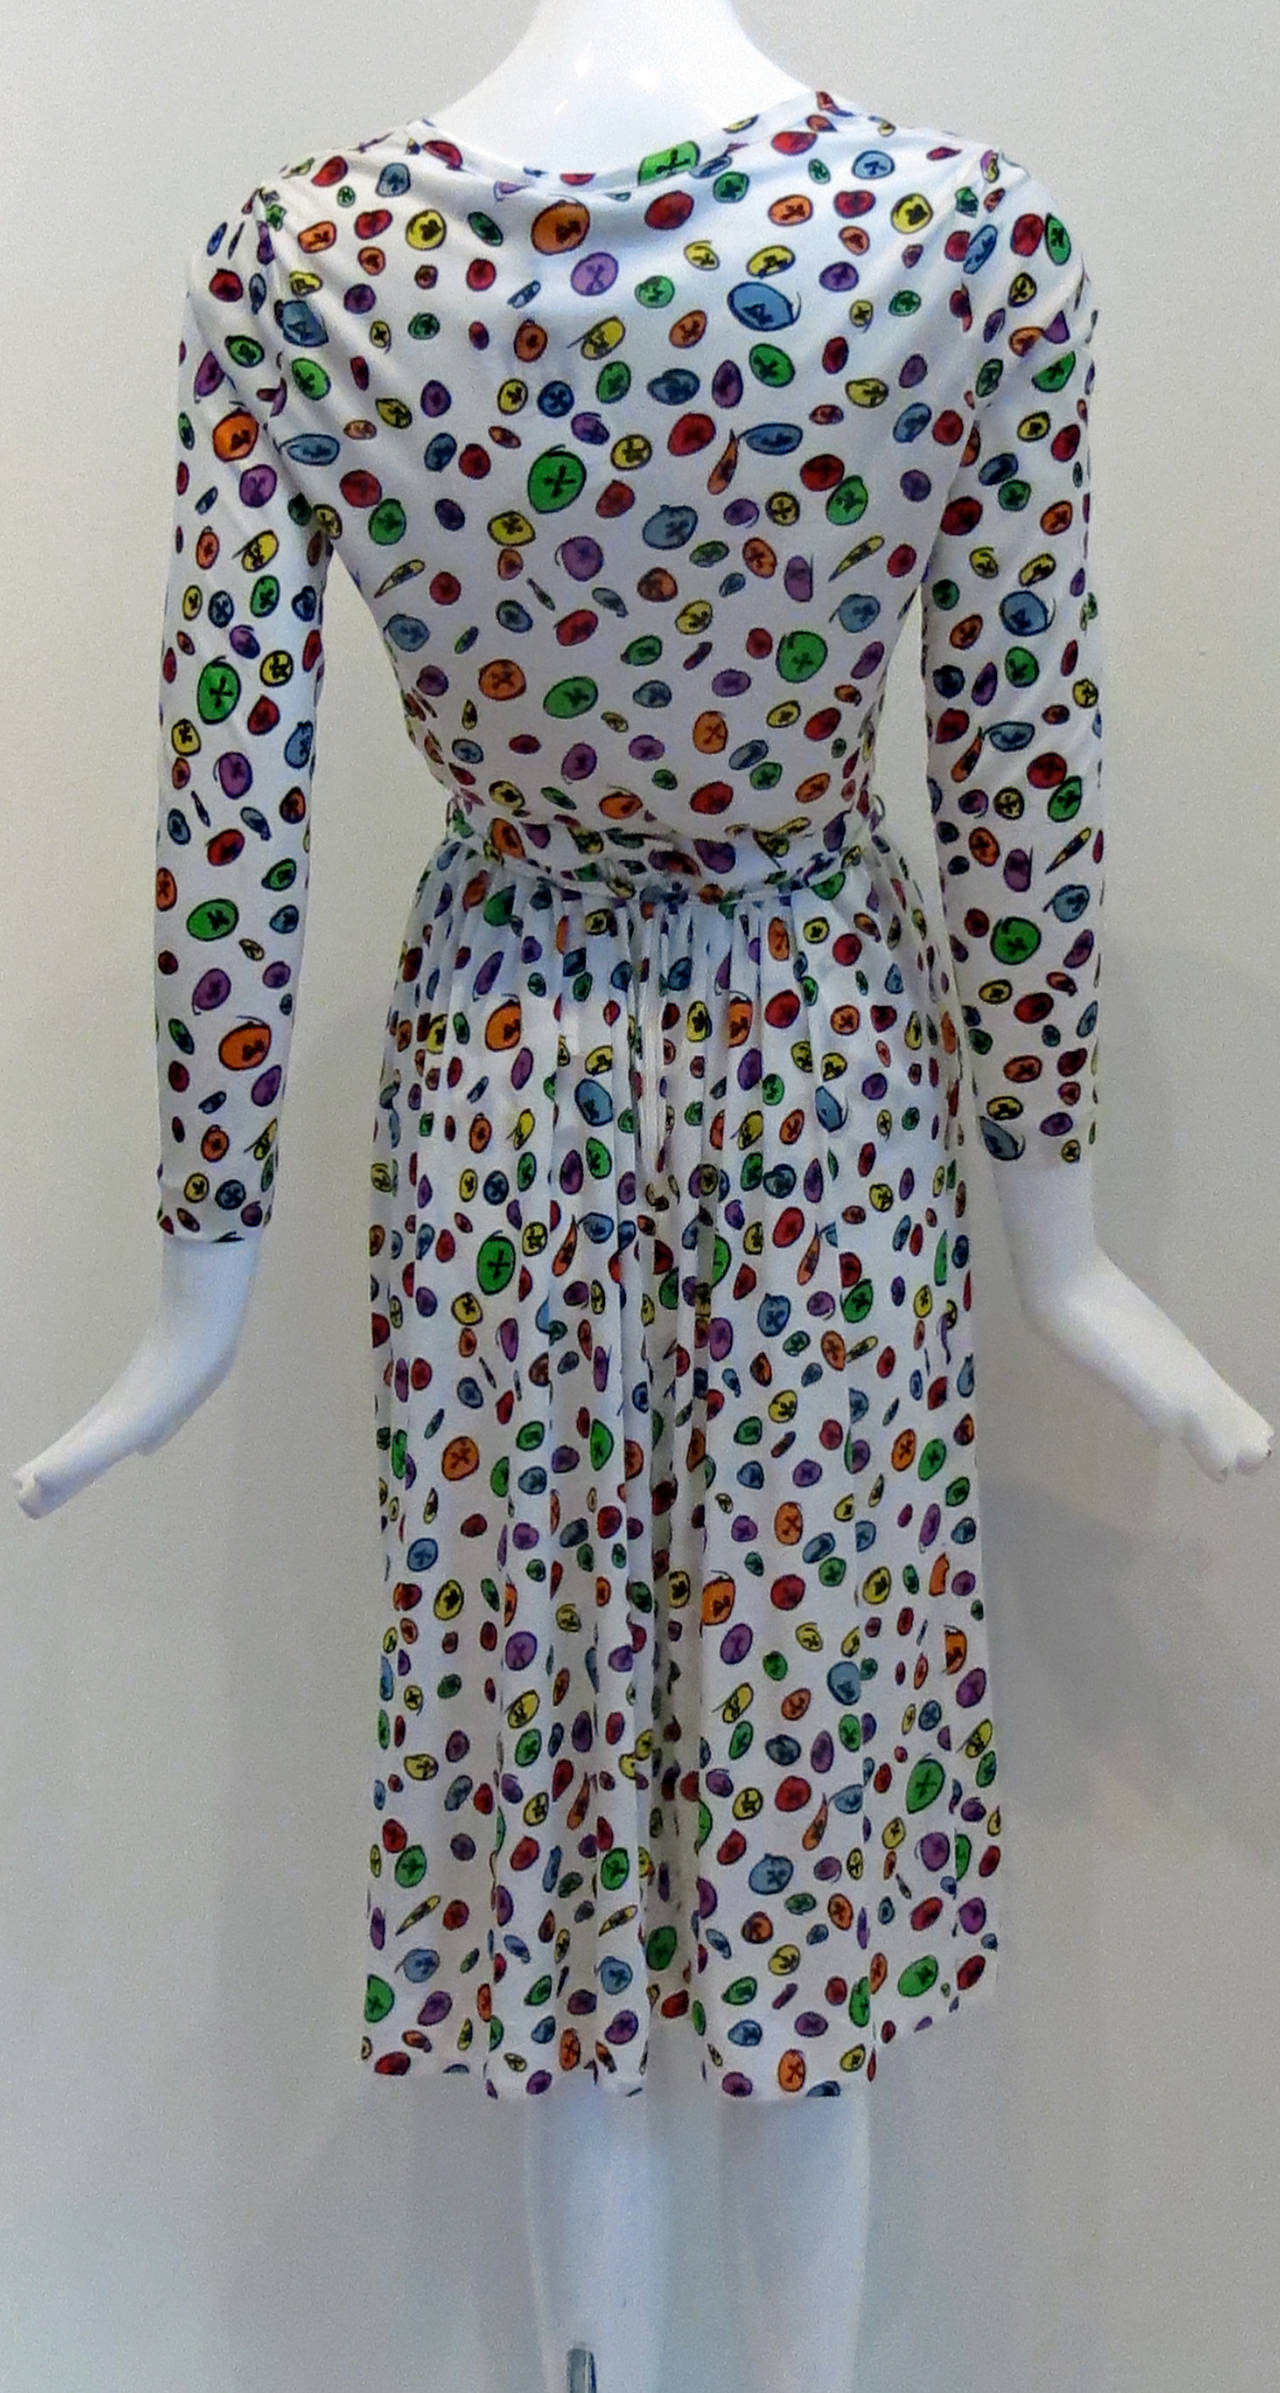 Vintage White Button Print Blouse And Skirt Set

*Please contact dealer prior to purchase for white glove shipping options*